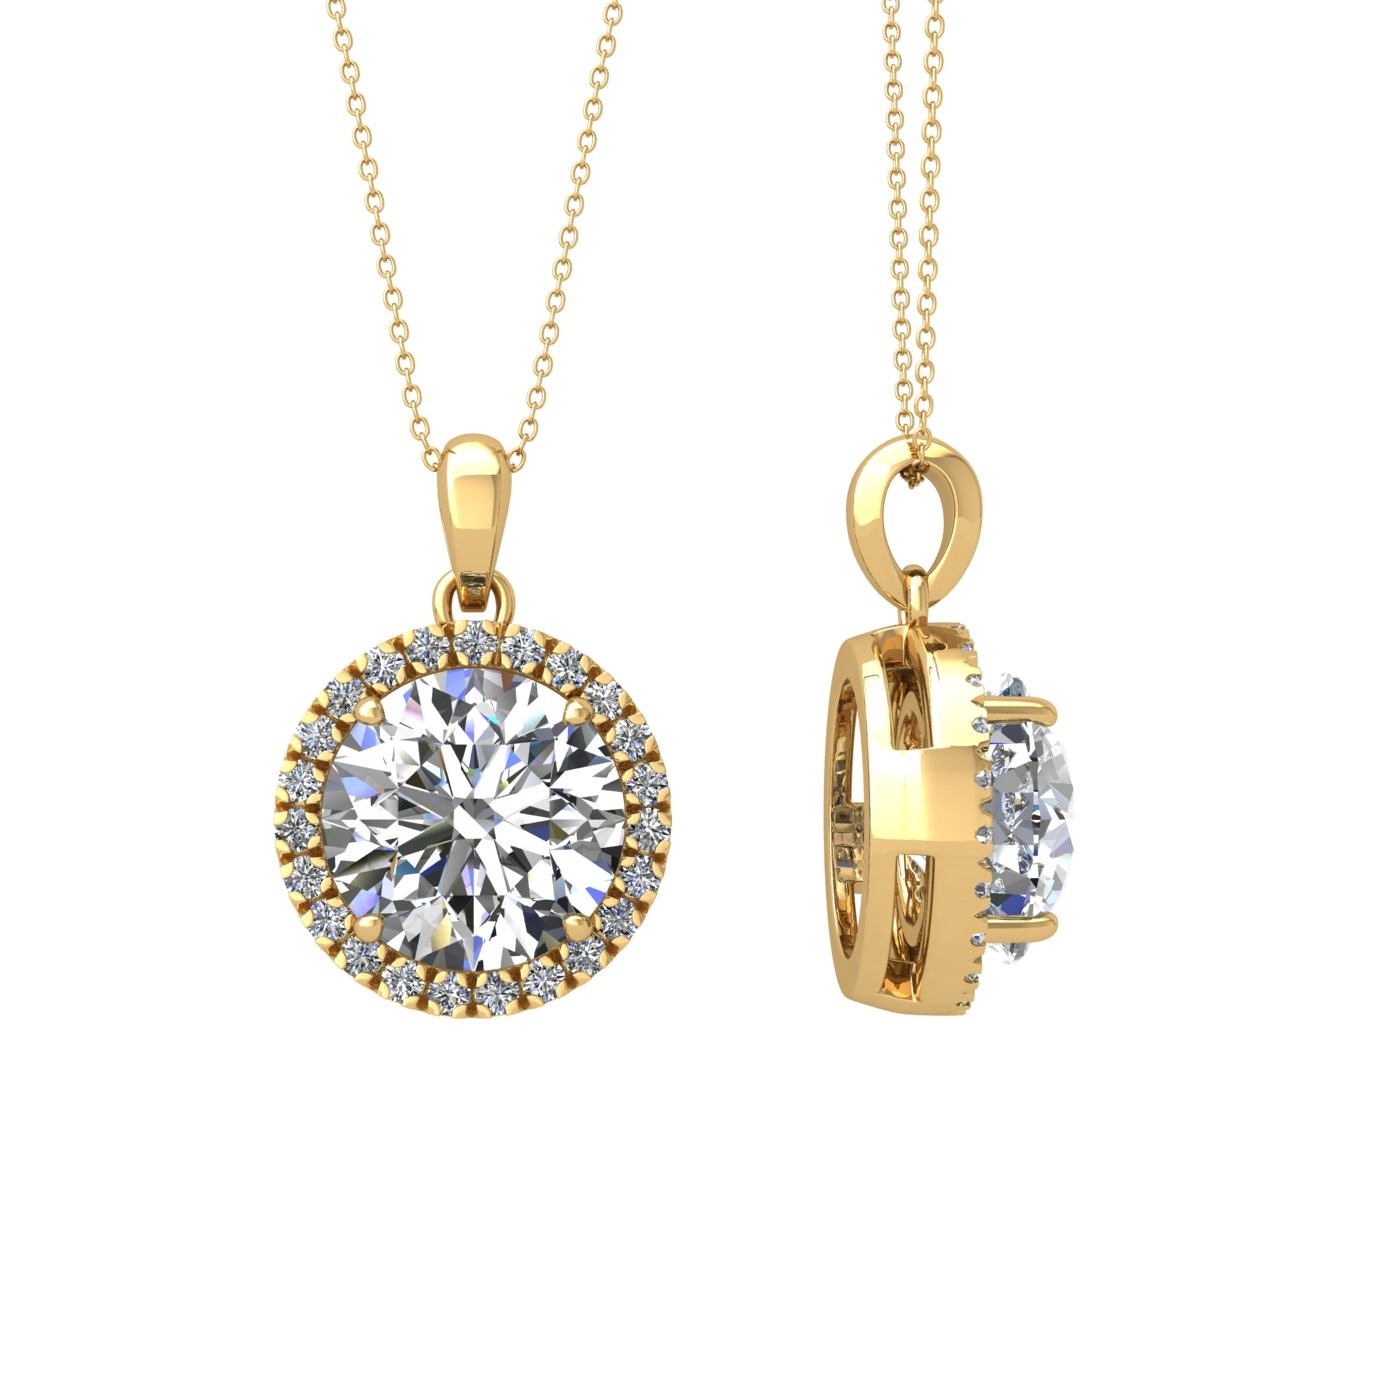 18k yellow gold  0,3 ct 4 prong round shape diamond pendant with diamond pavÉ set halo including chain seperate from the pendant Photos & images